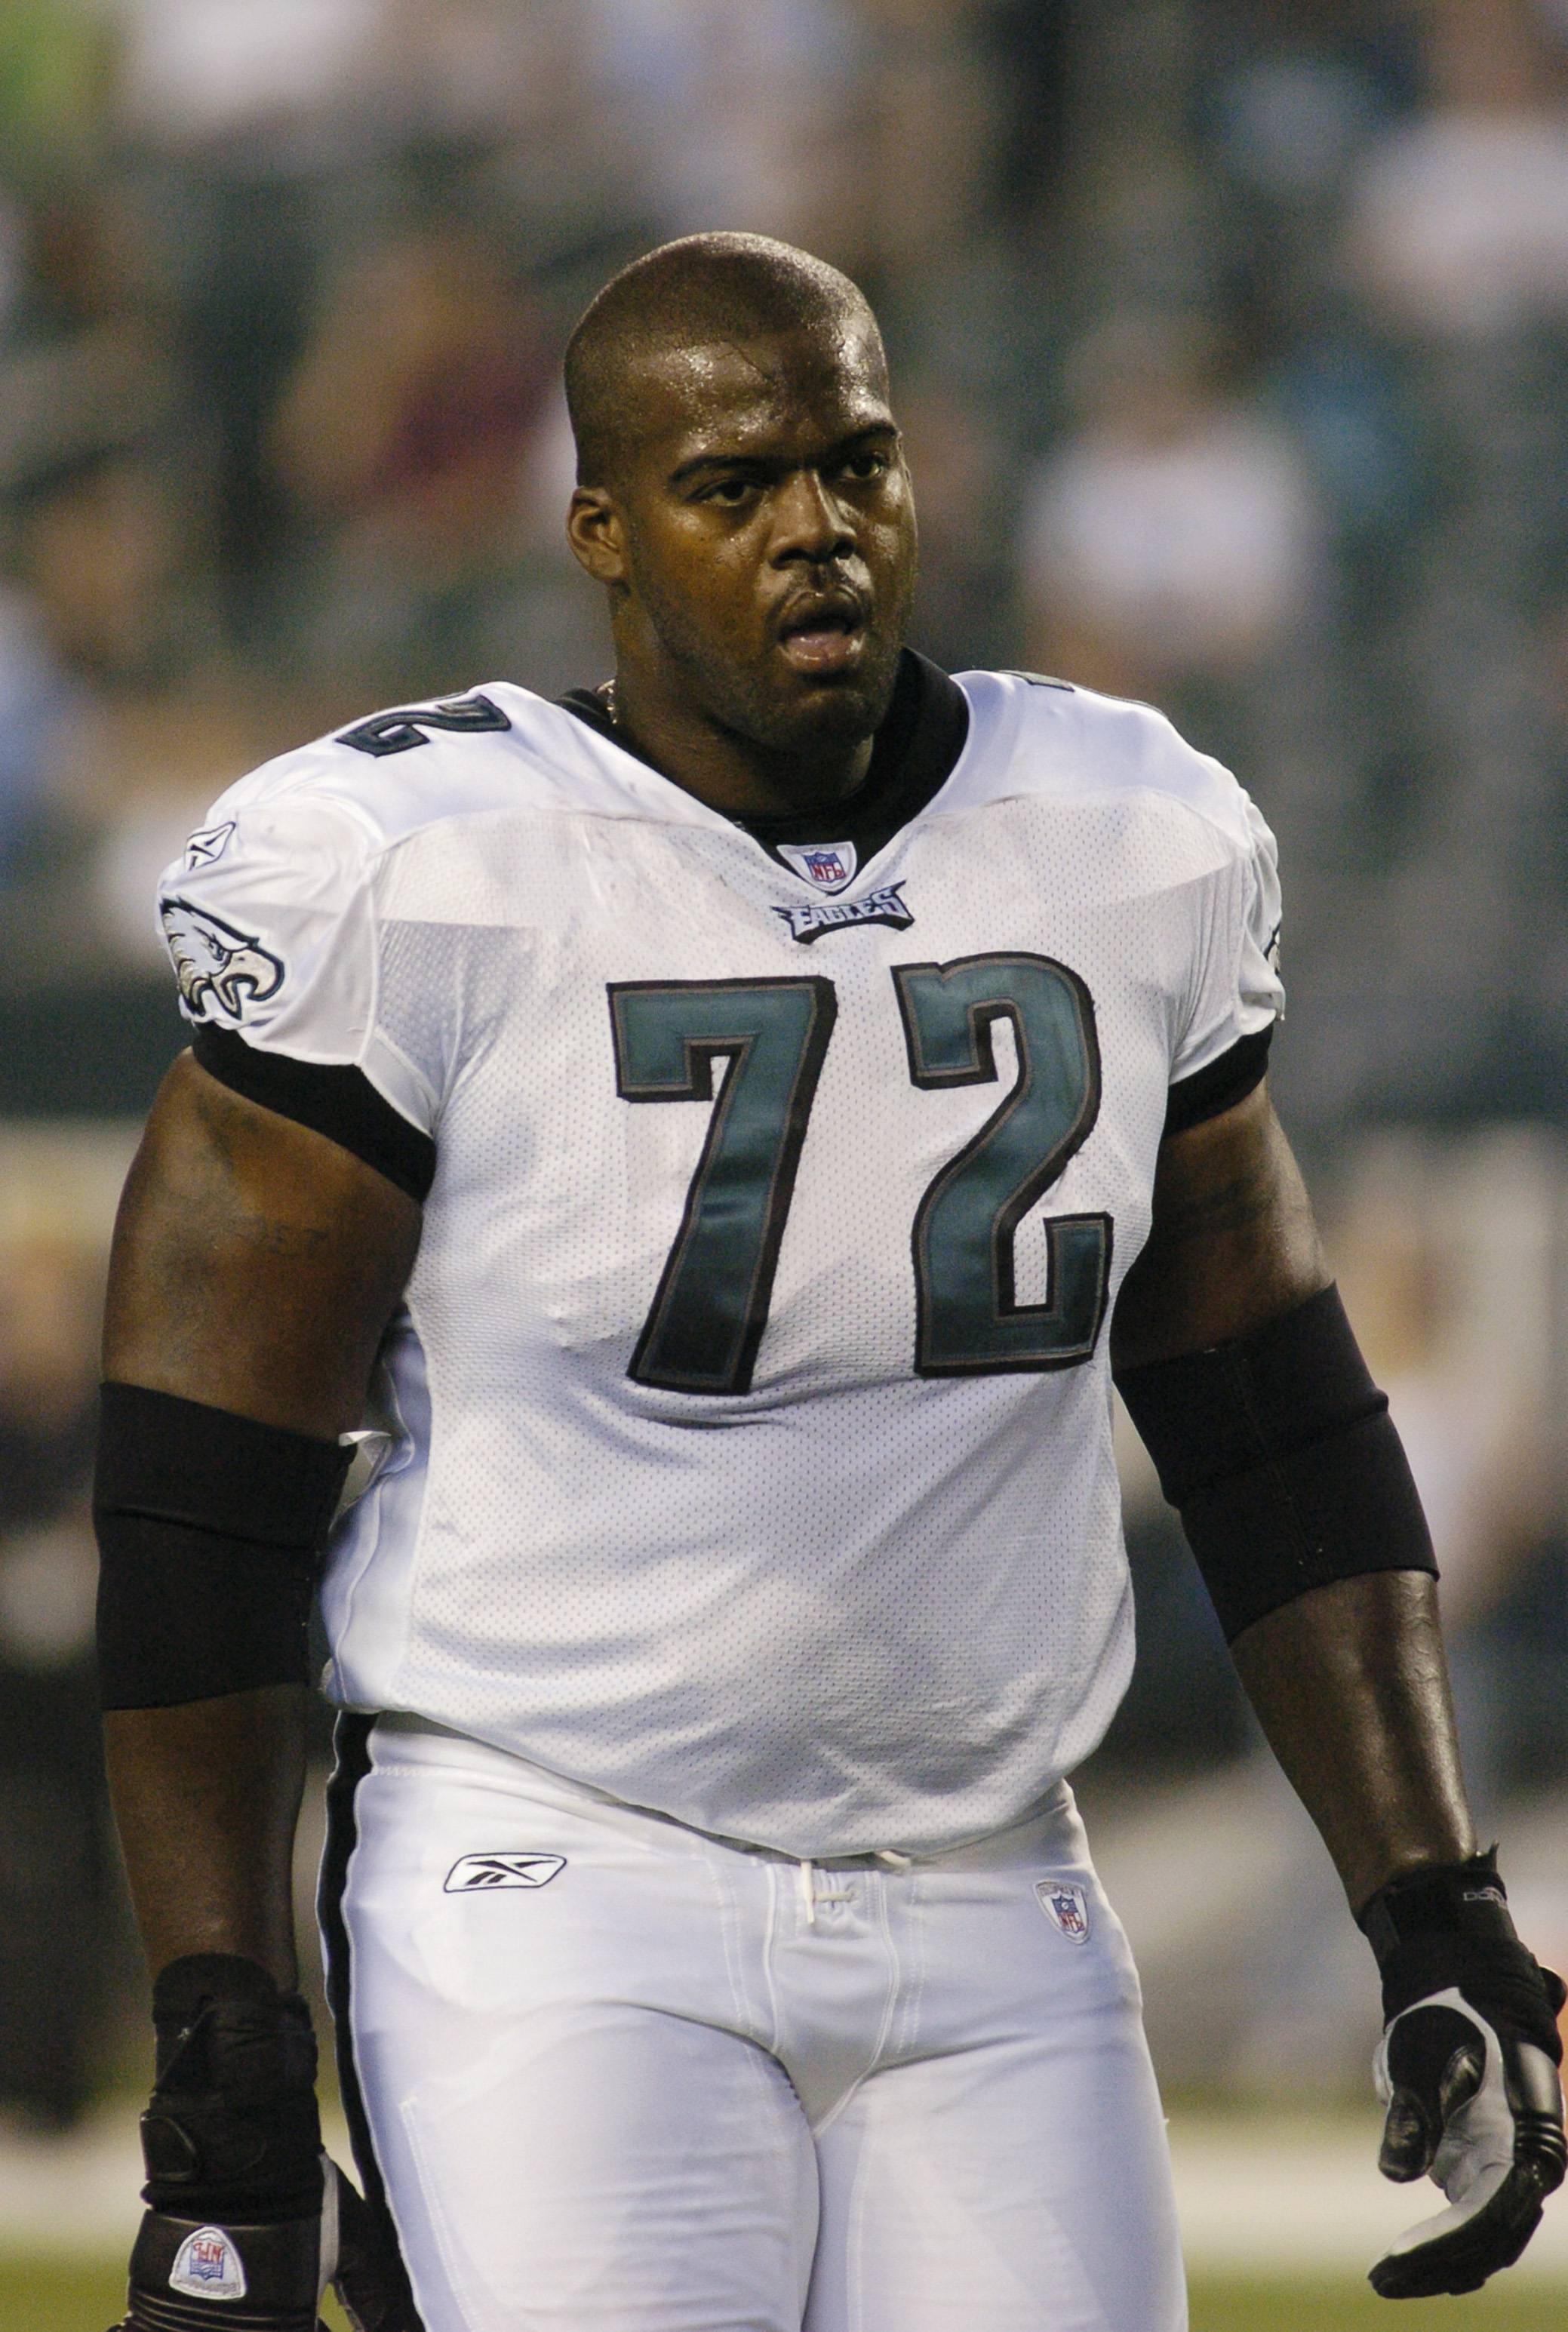 PHILADELPHIA - AUGUST 20:  Tra Thomas of the Philadelphia Eagles looks on against the Baltimore Ravens during the preseason NFL game on August 20, 2004 at Lincoln Financial Field in Philadelphia, Pennsylvania.  The Eagles defeated the Ravens 26-17.  (Phot